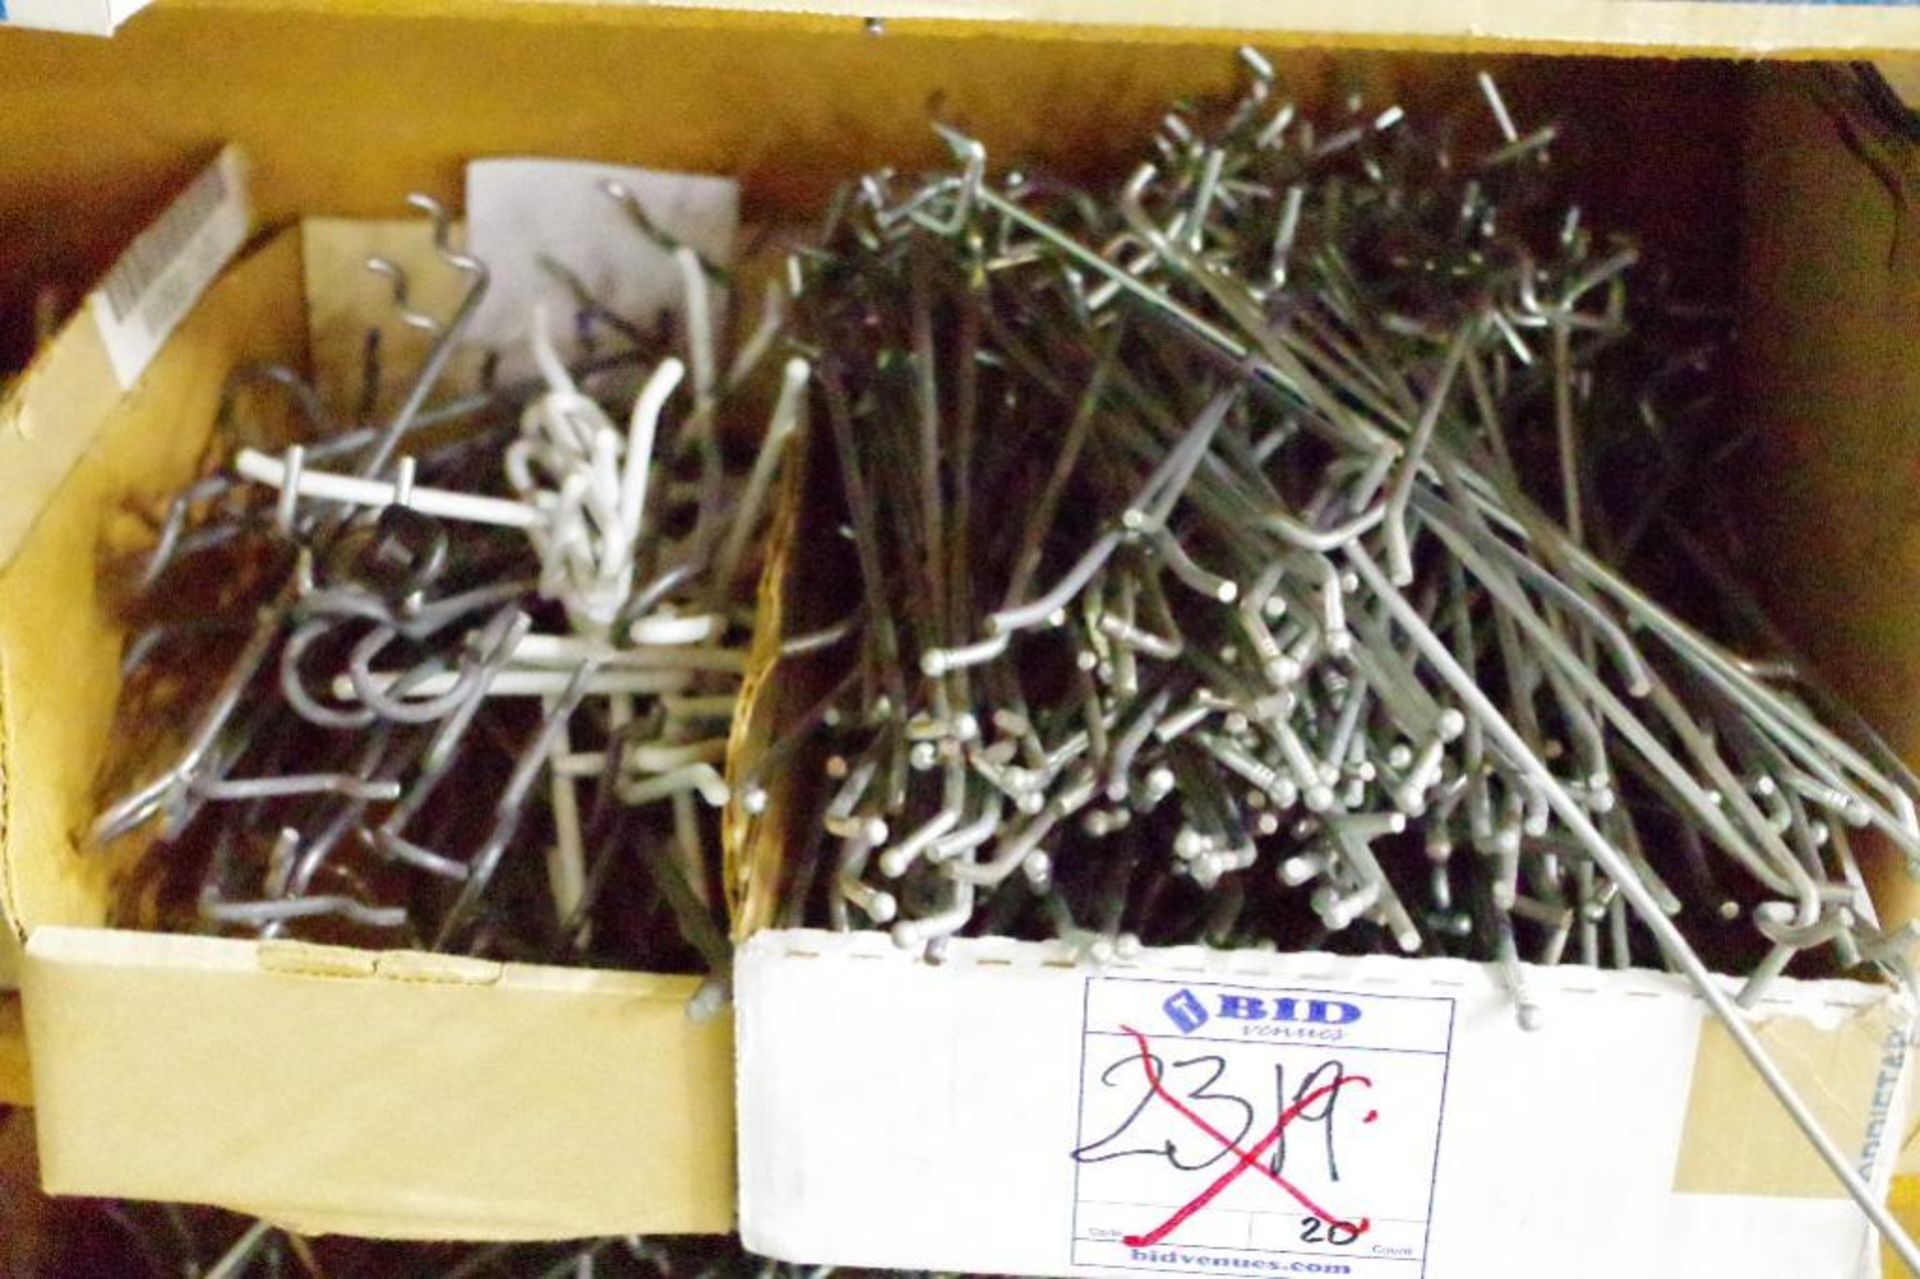 LARGE Quantity of Hooks for Displays, Various Sizes - Image 3 of 3